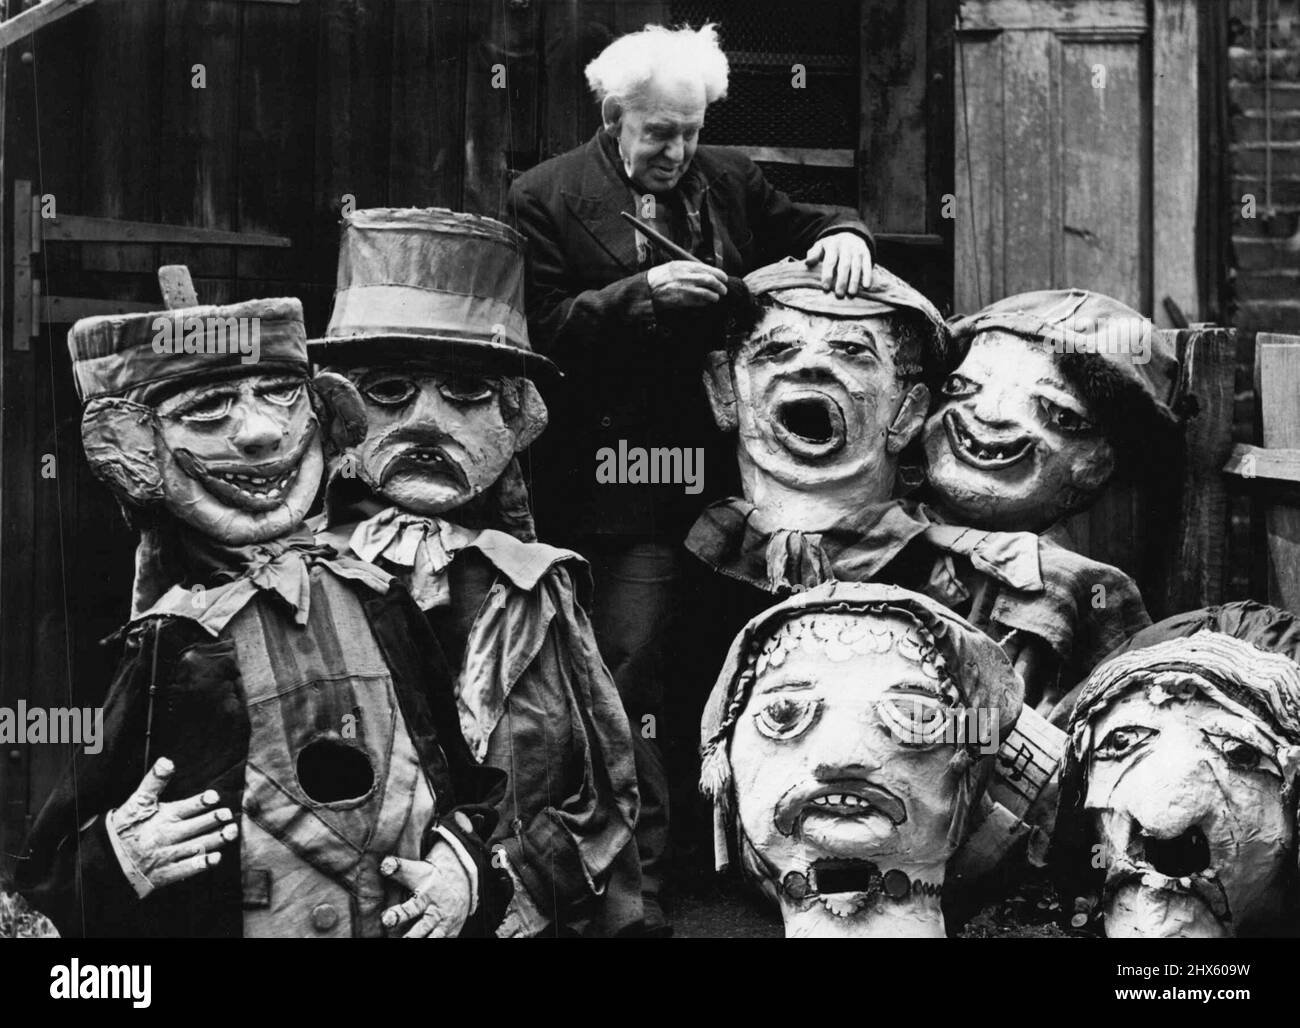 81-Year-old Barnum And Bailey Clown Still Makes Them Laugh -- 81-year-old Harry Russell photographed at work among some of his grotesque giant heads which he makes. In a white-washed shed in Norwood High Street, West Norwood, a youthful old man with a bushy mop of white hair continues a long life of making people laugh. 81-year-old Mr. Harry Russell was once a famous clown with Barnum and Bailey's circus, an claims to be its oldest survivor. He now spends his days making the giant papier mache Stock Photo